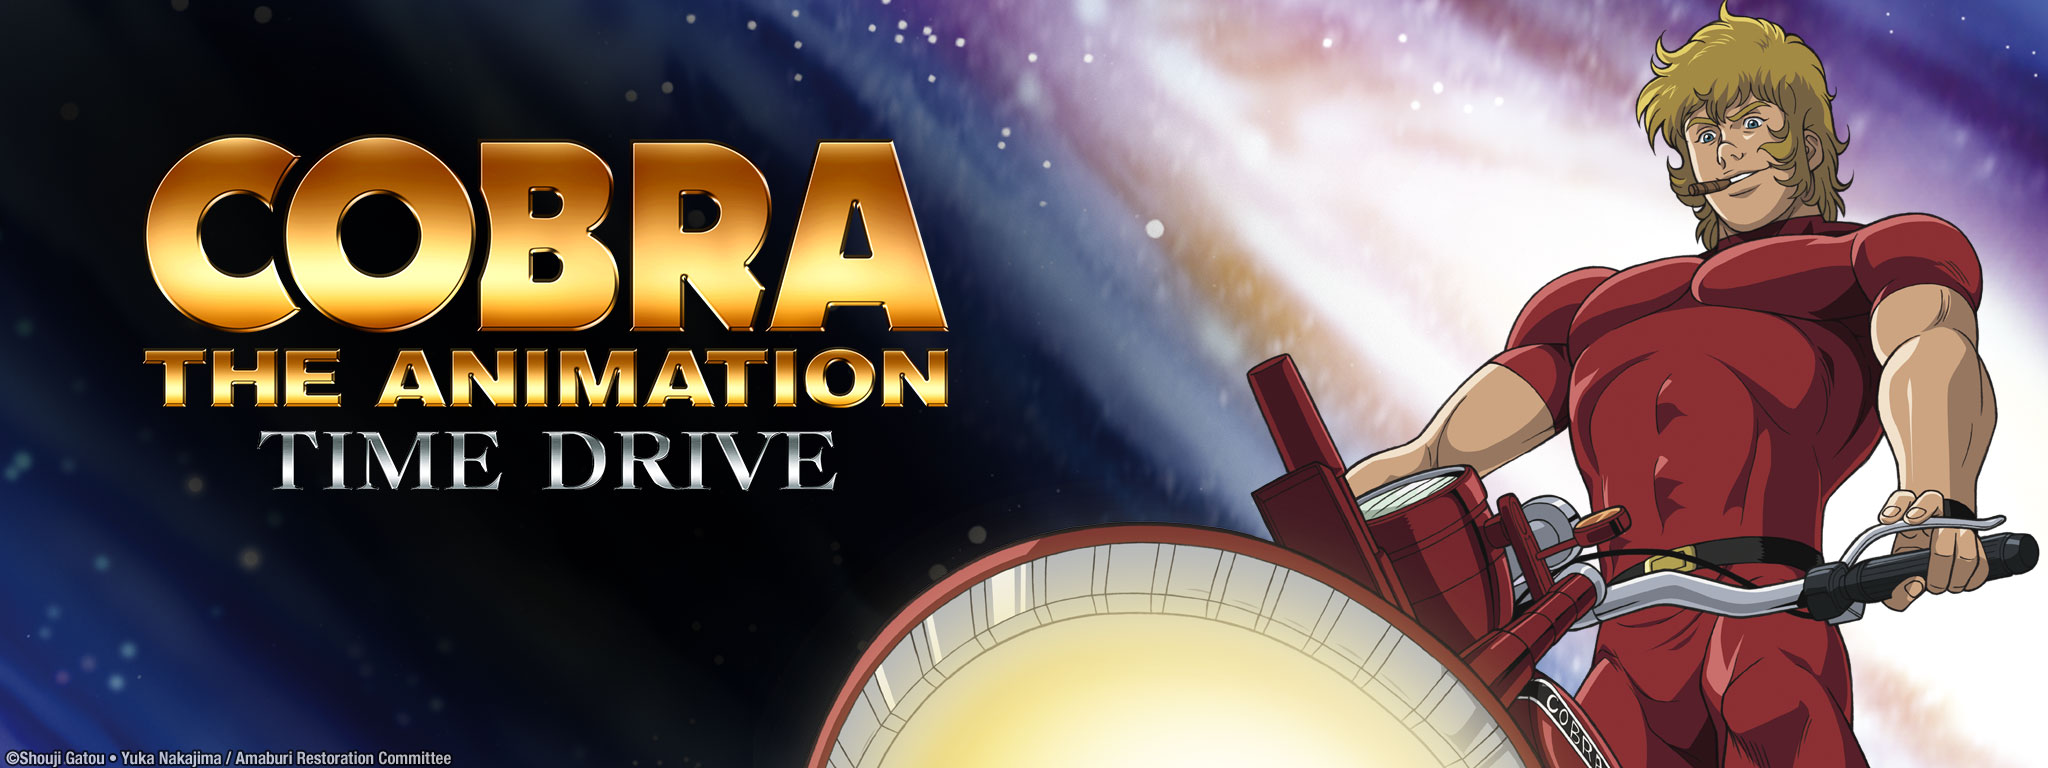 Title Art for Cobra Time Drive